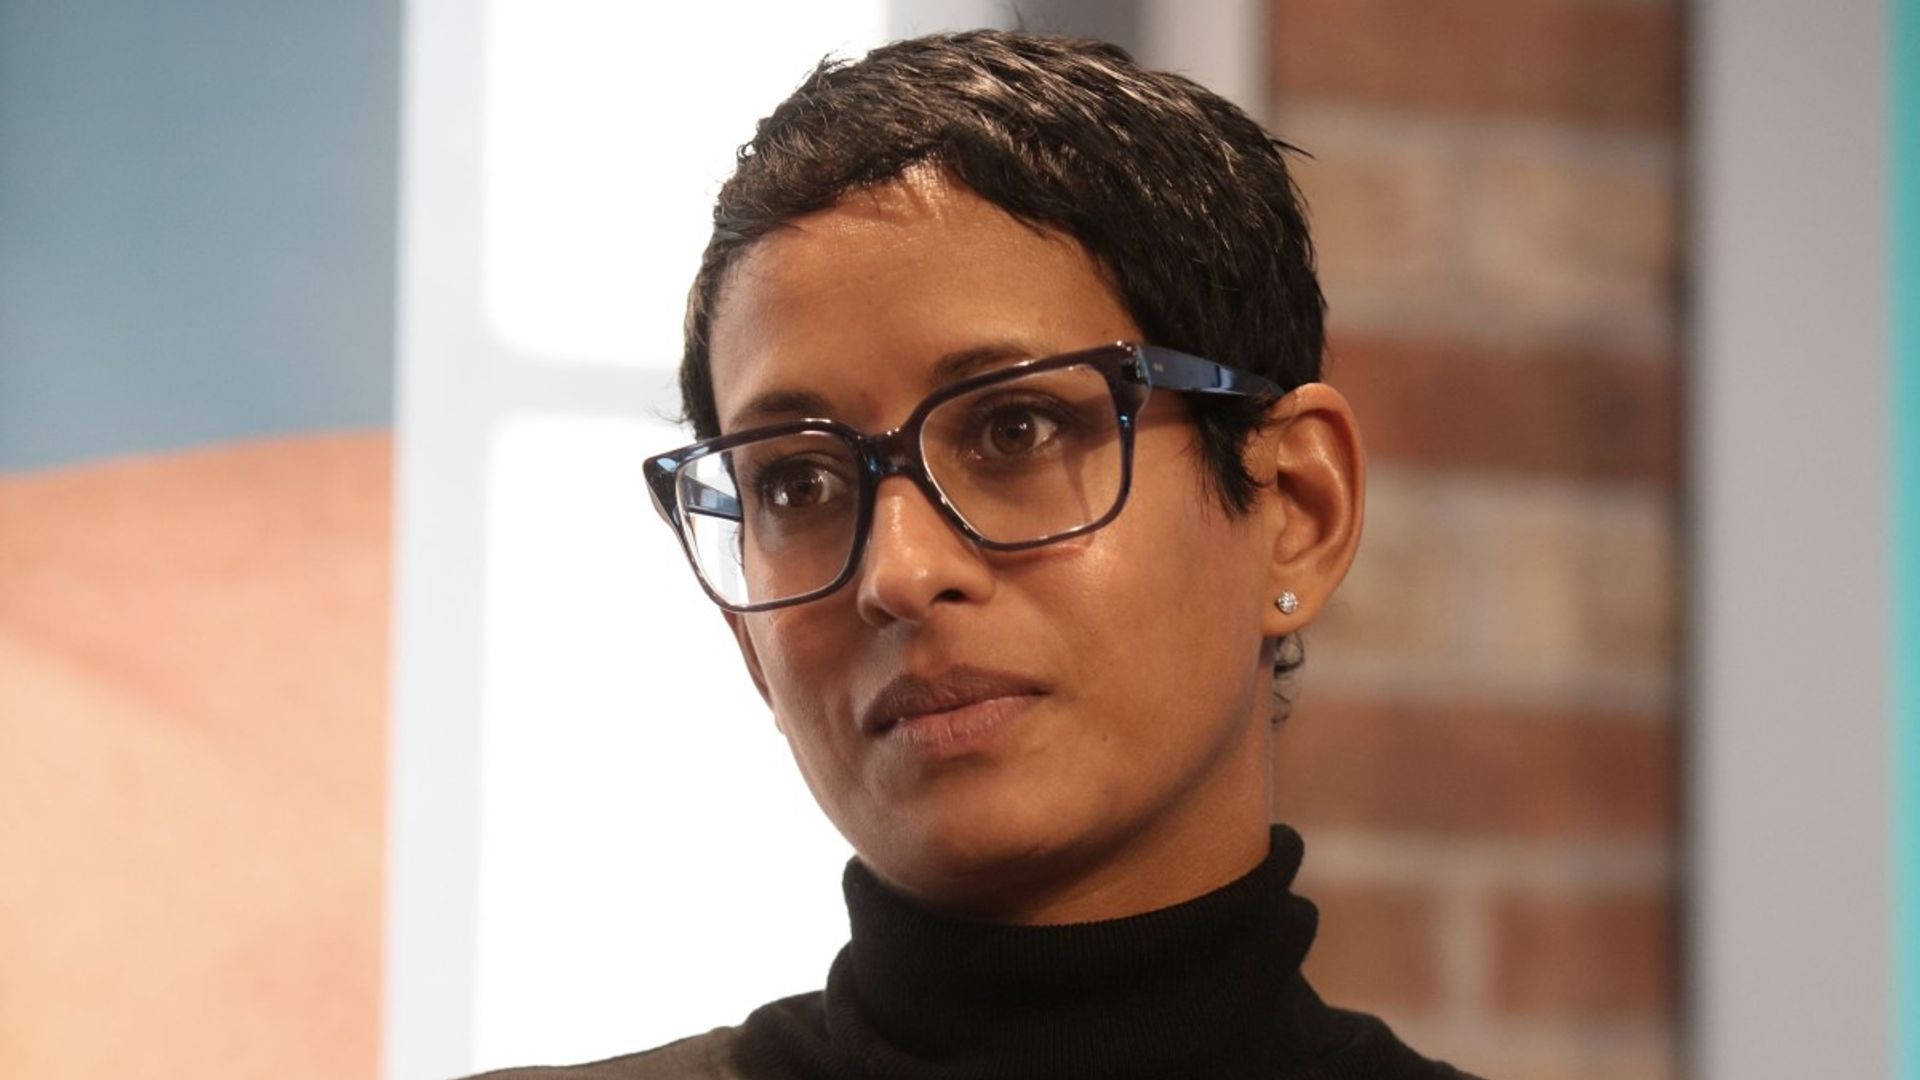 Naga Munchetty looks concerned as she attends a panel discussion